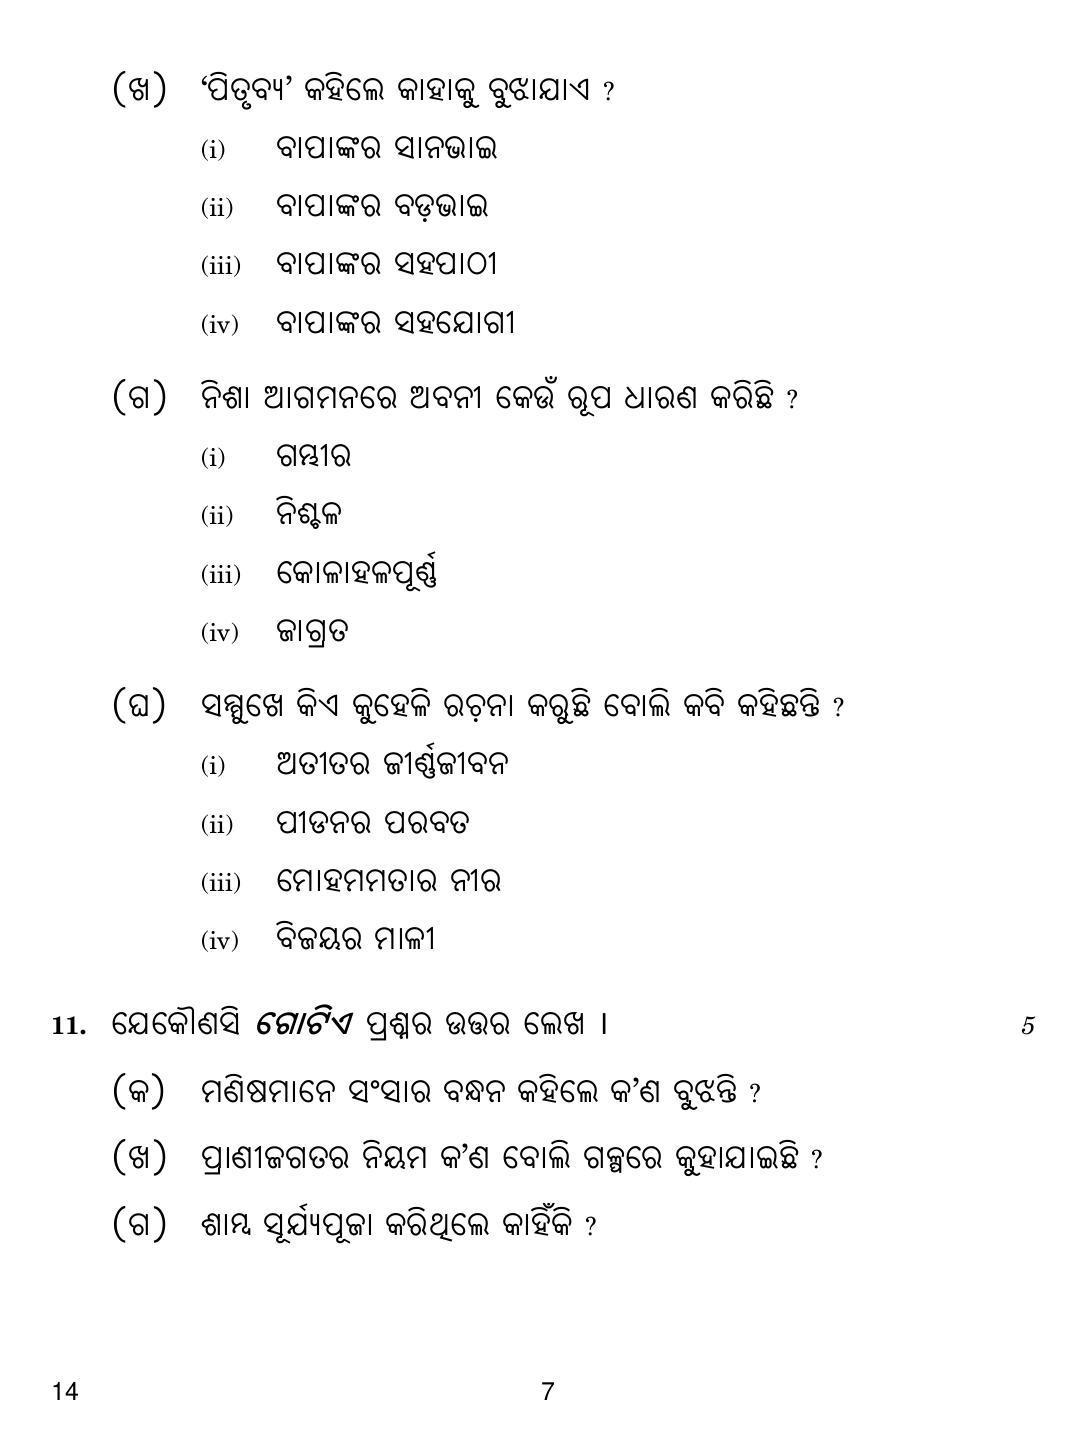 CBSE Class 10 14 Odia 2019 Question Paper - Page 7